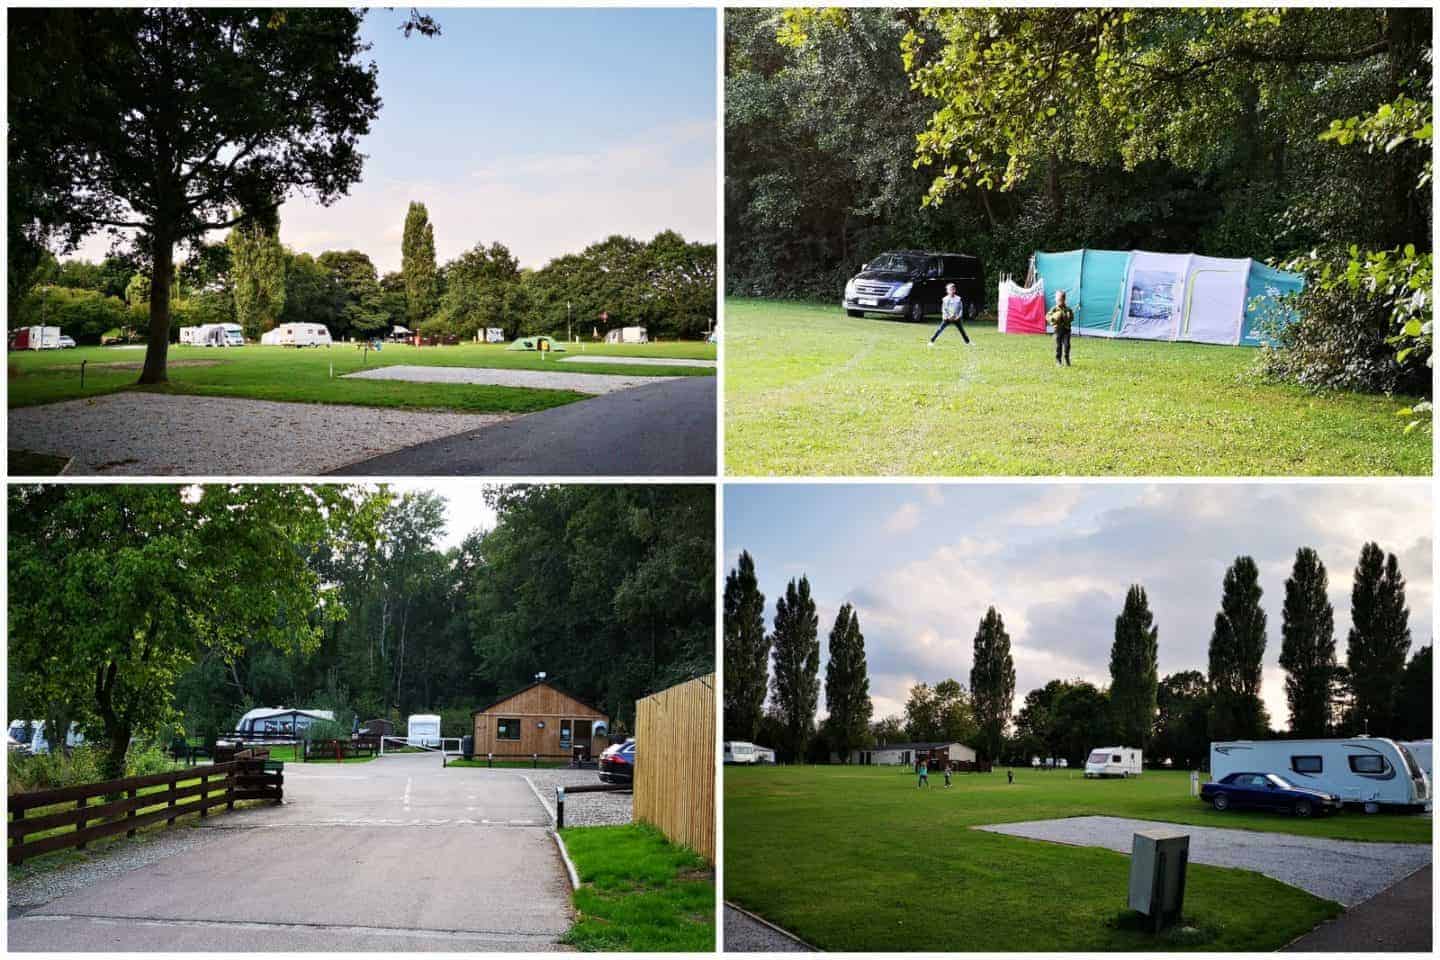 Kelvedon Hatch Camping and Caravanning Club Site